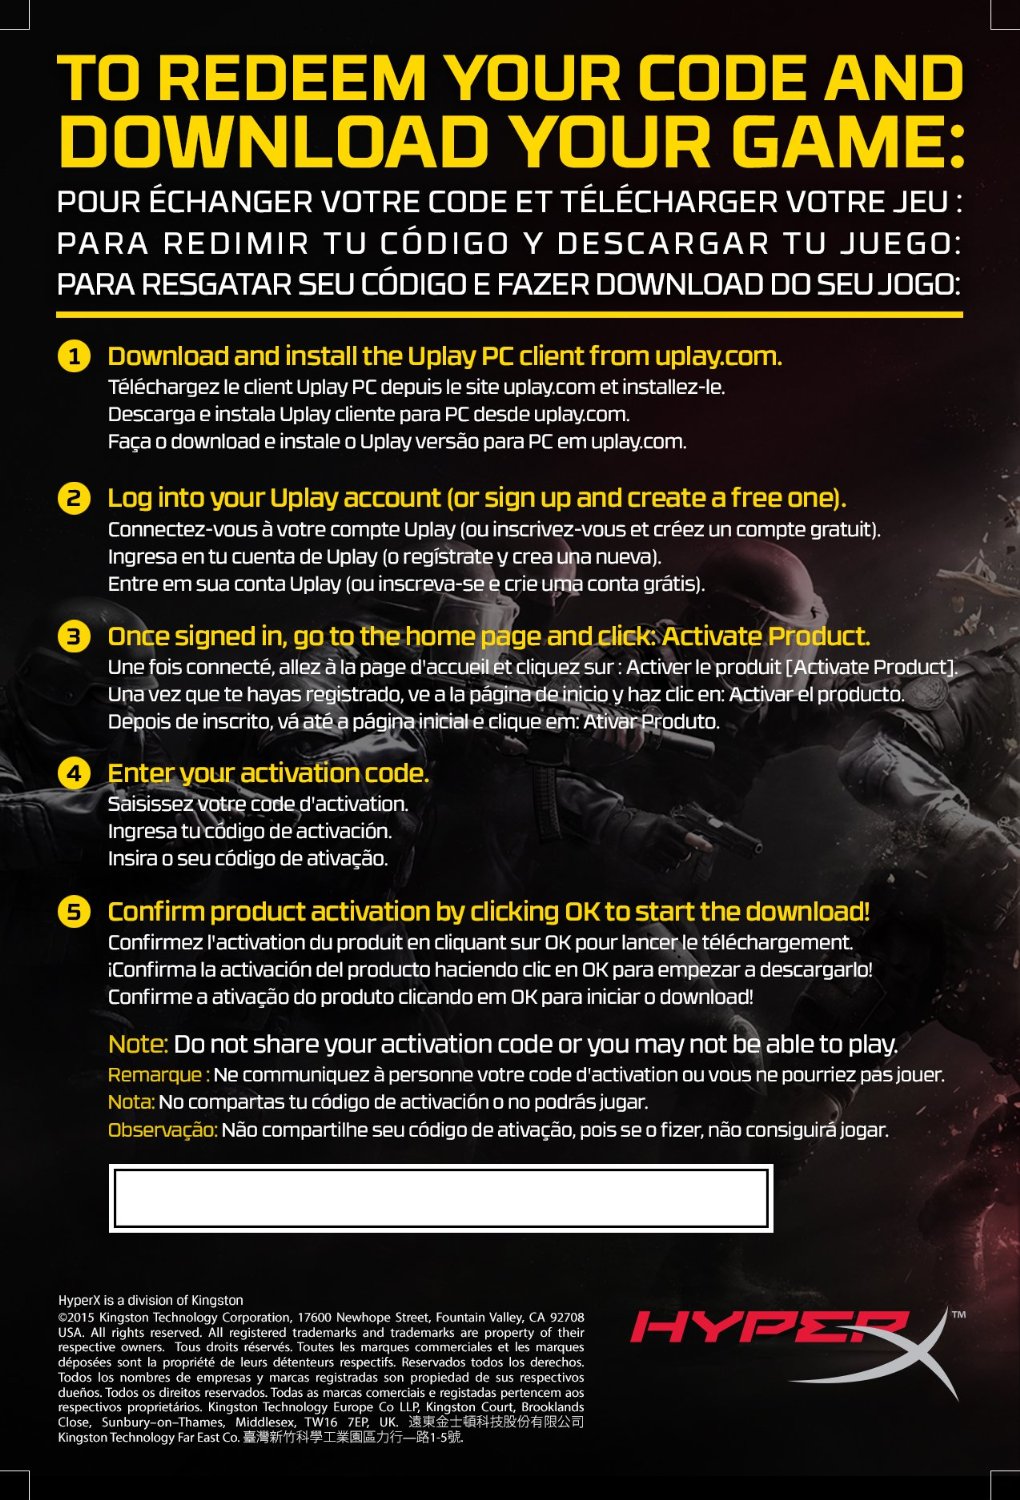 Rainbow Six Siege Free Download Code For Pc